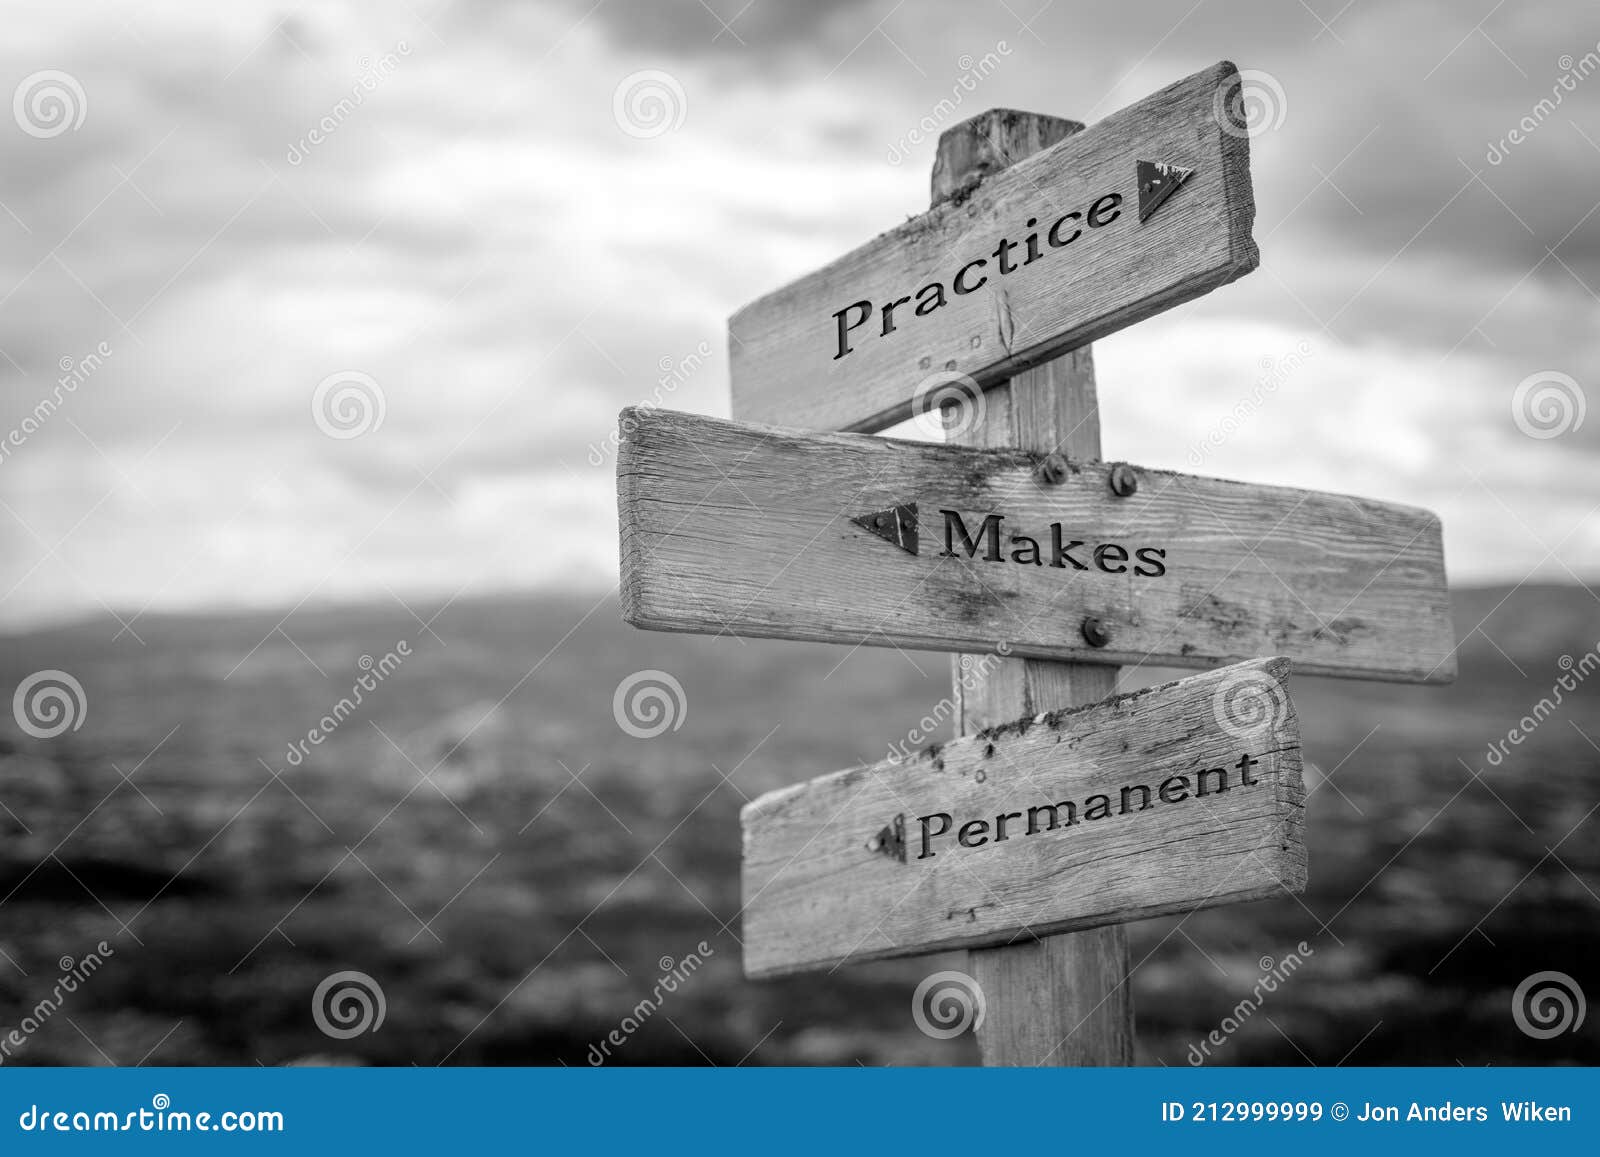 Practice Makes Progress Photos Free Royalty Free Stock Photos From Dreamstime